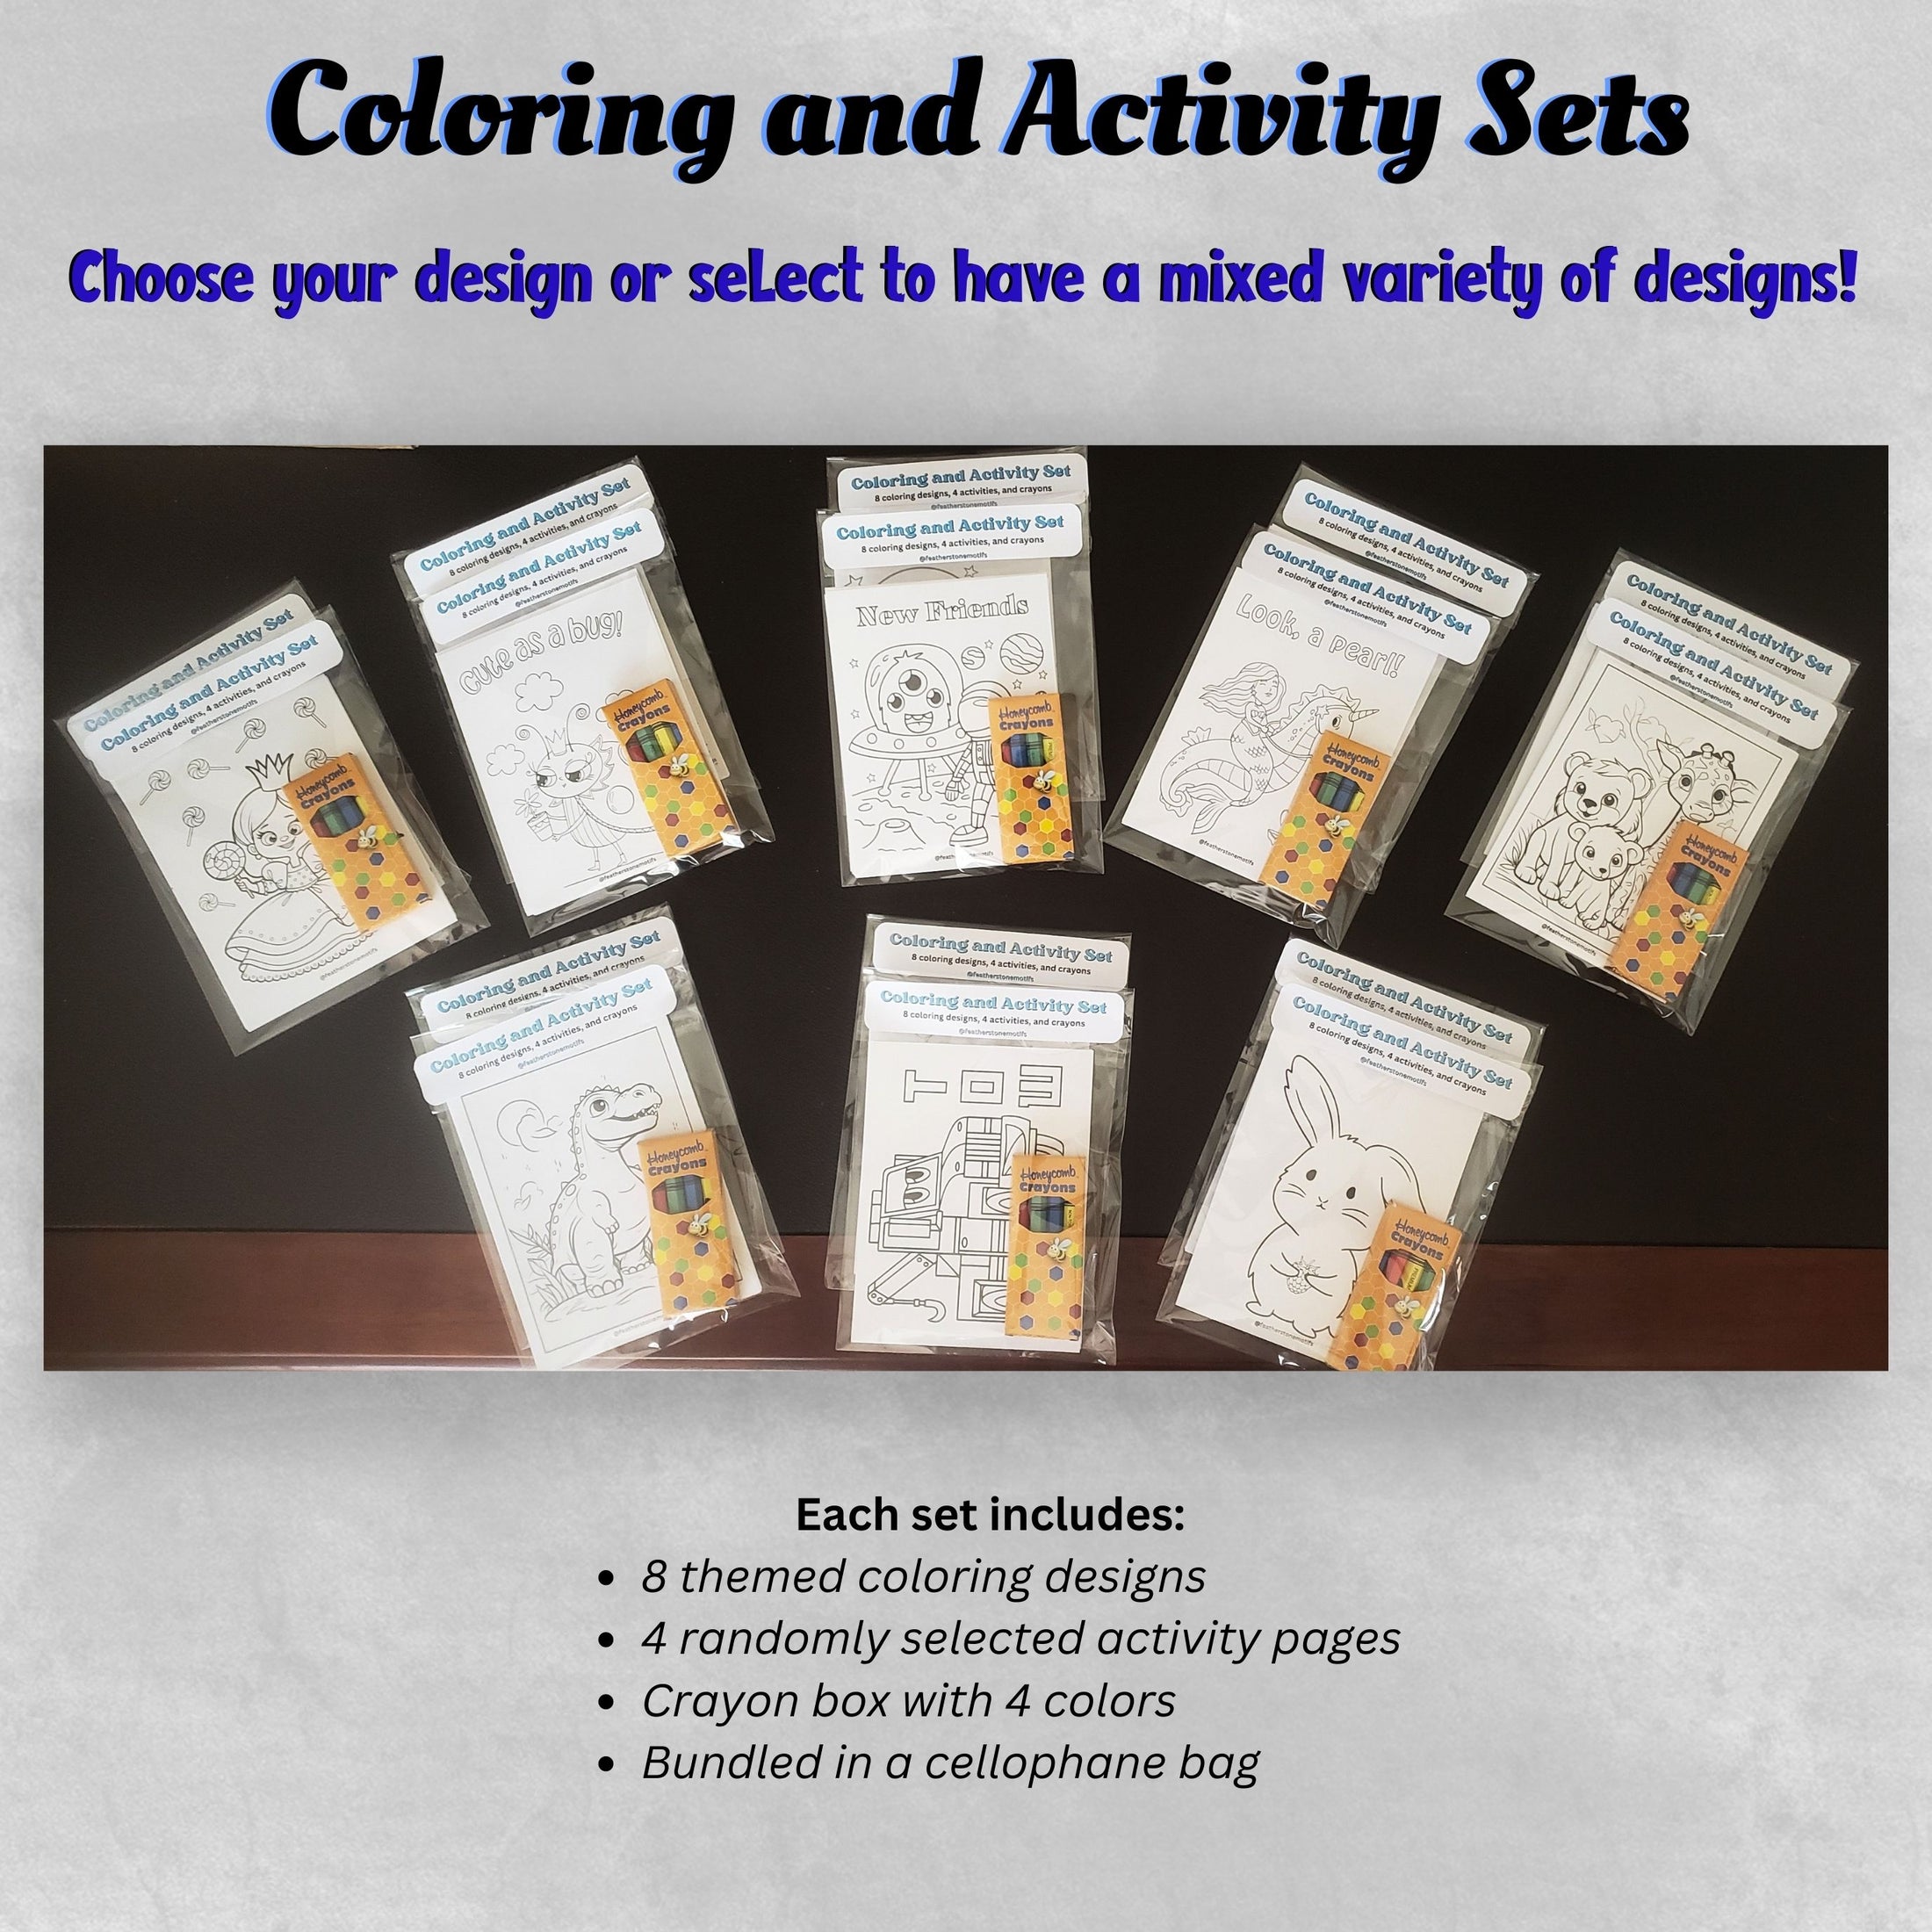 This image shows the coloring and activity sets in their final packaging